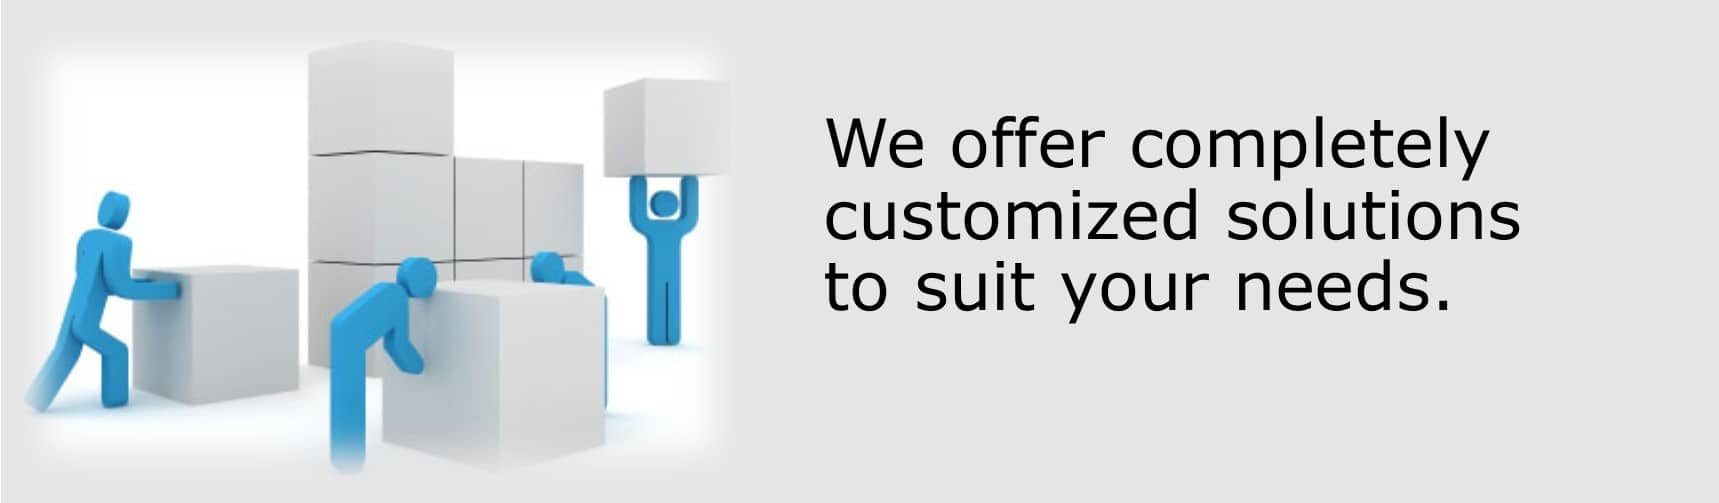 SWOT & PESTLE.com provides customised solutions to suit customer needs